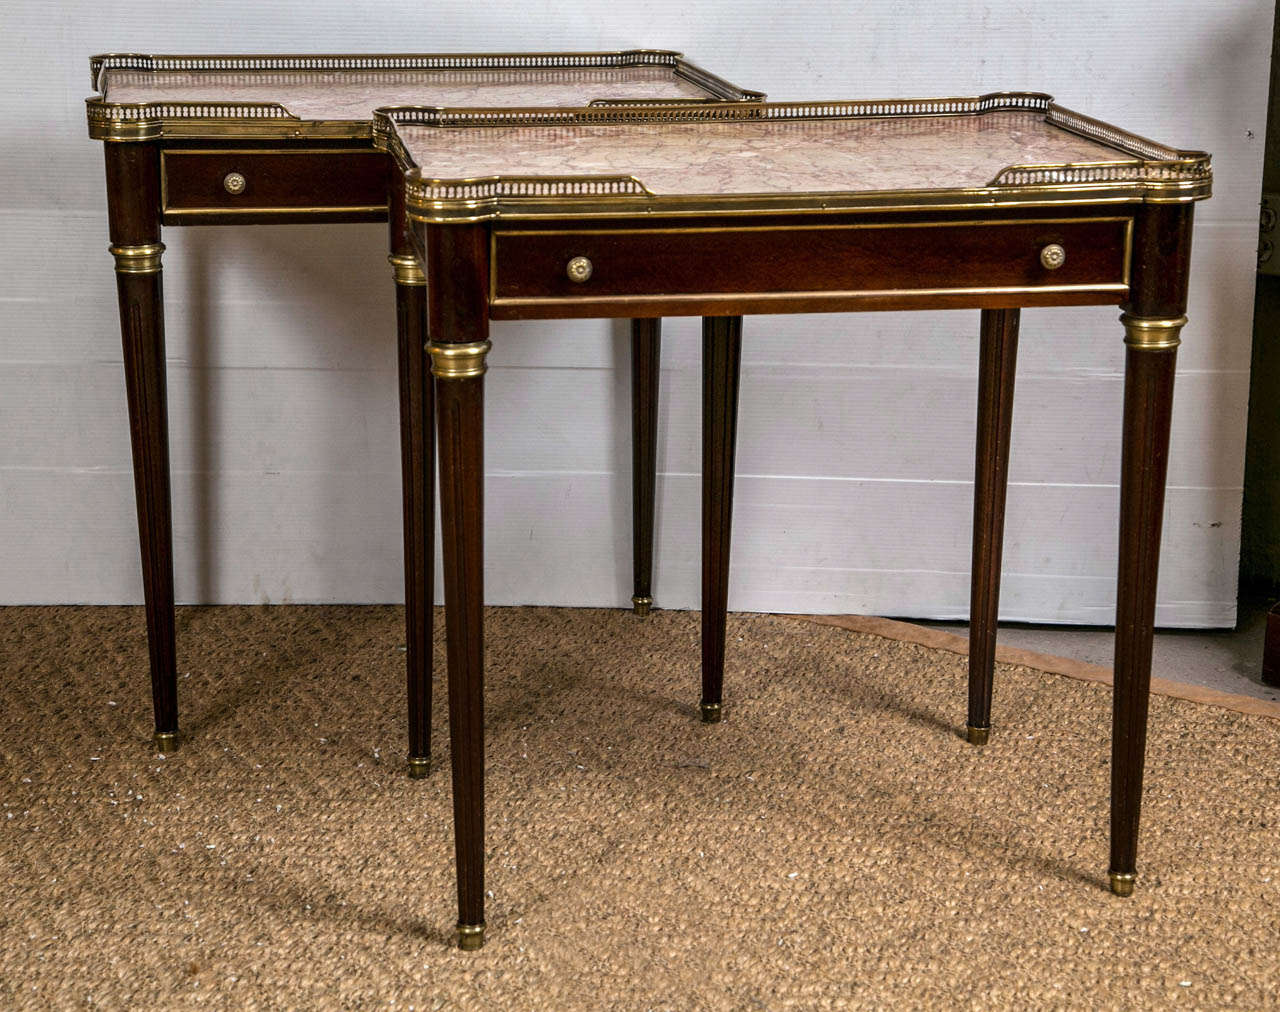 A Pair of French Louis XVI style End Tables. The bronze sabots leading to a group Louis XVI legs terminating in bronze caps. The pair having a single center drawer under a pierced bronze galleried marble top. by Maison Jansen